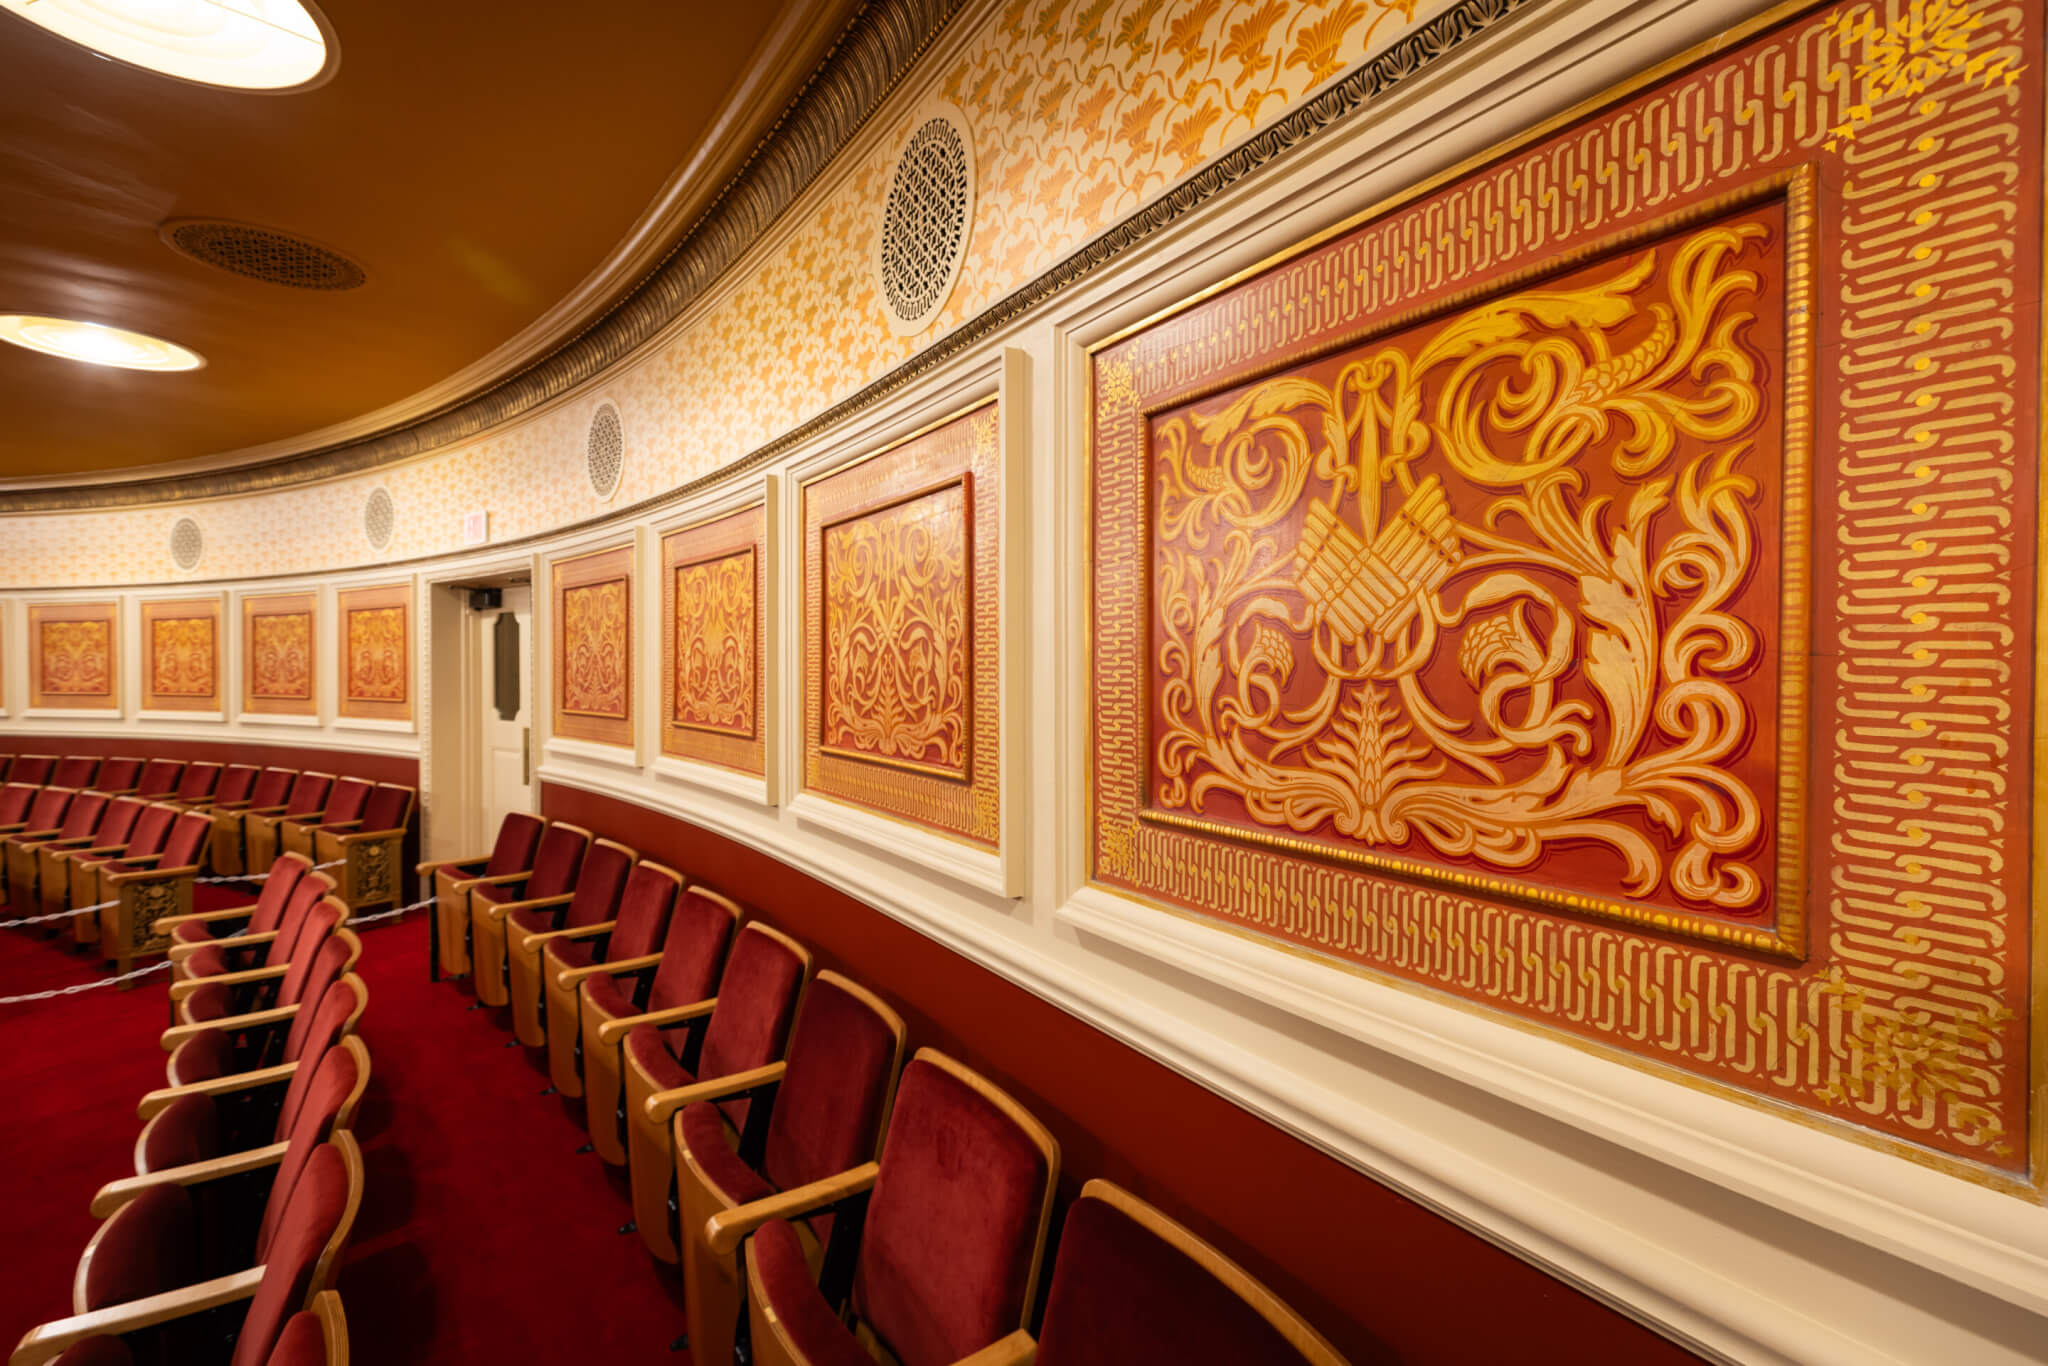 Detailed view of artistic panels in carnegie music hall